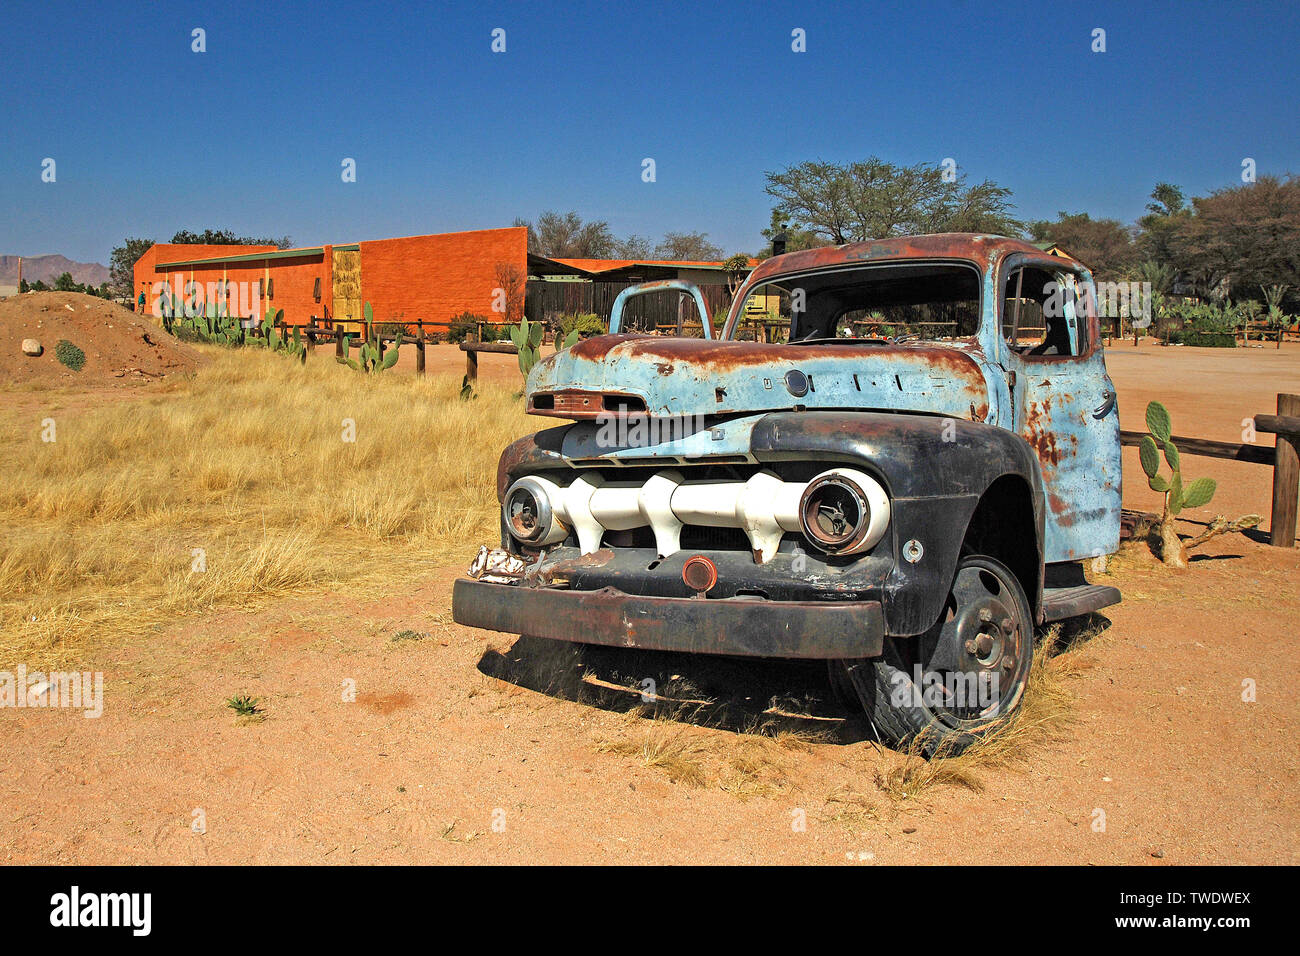 Old truck wreck at the road of the town Solitaire, Namibia, Africa Stock Photo